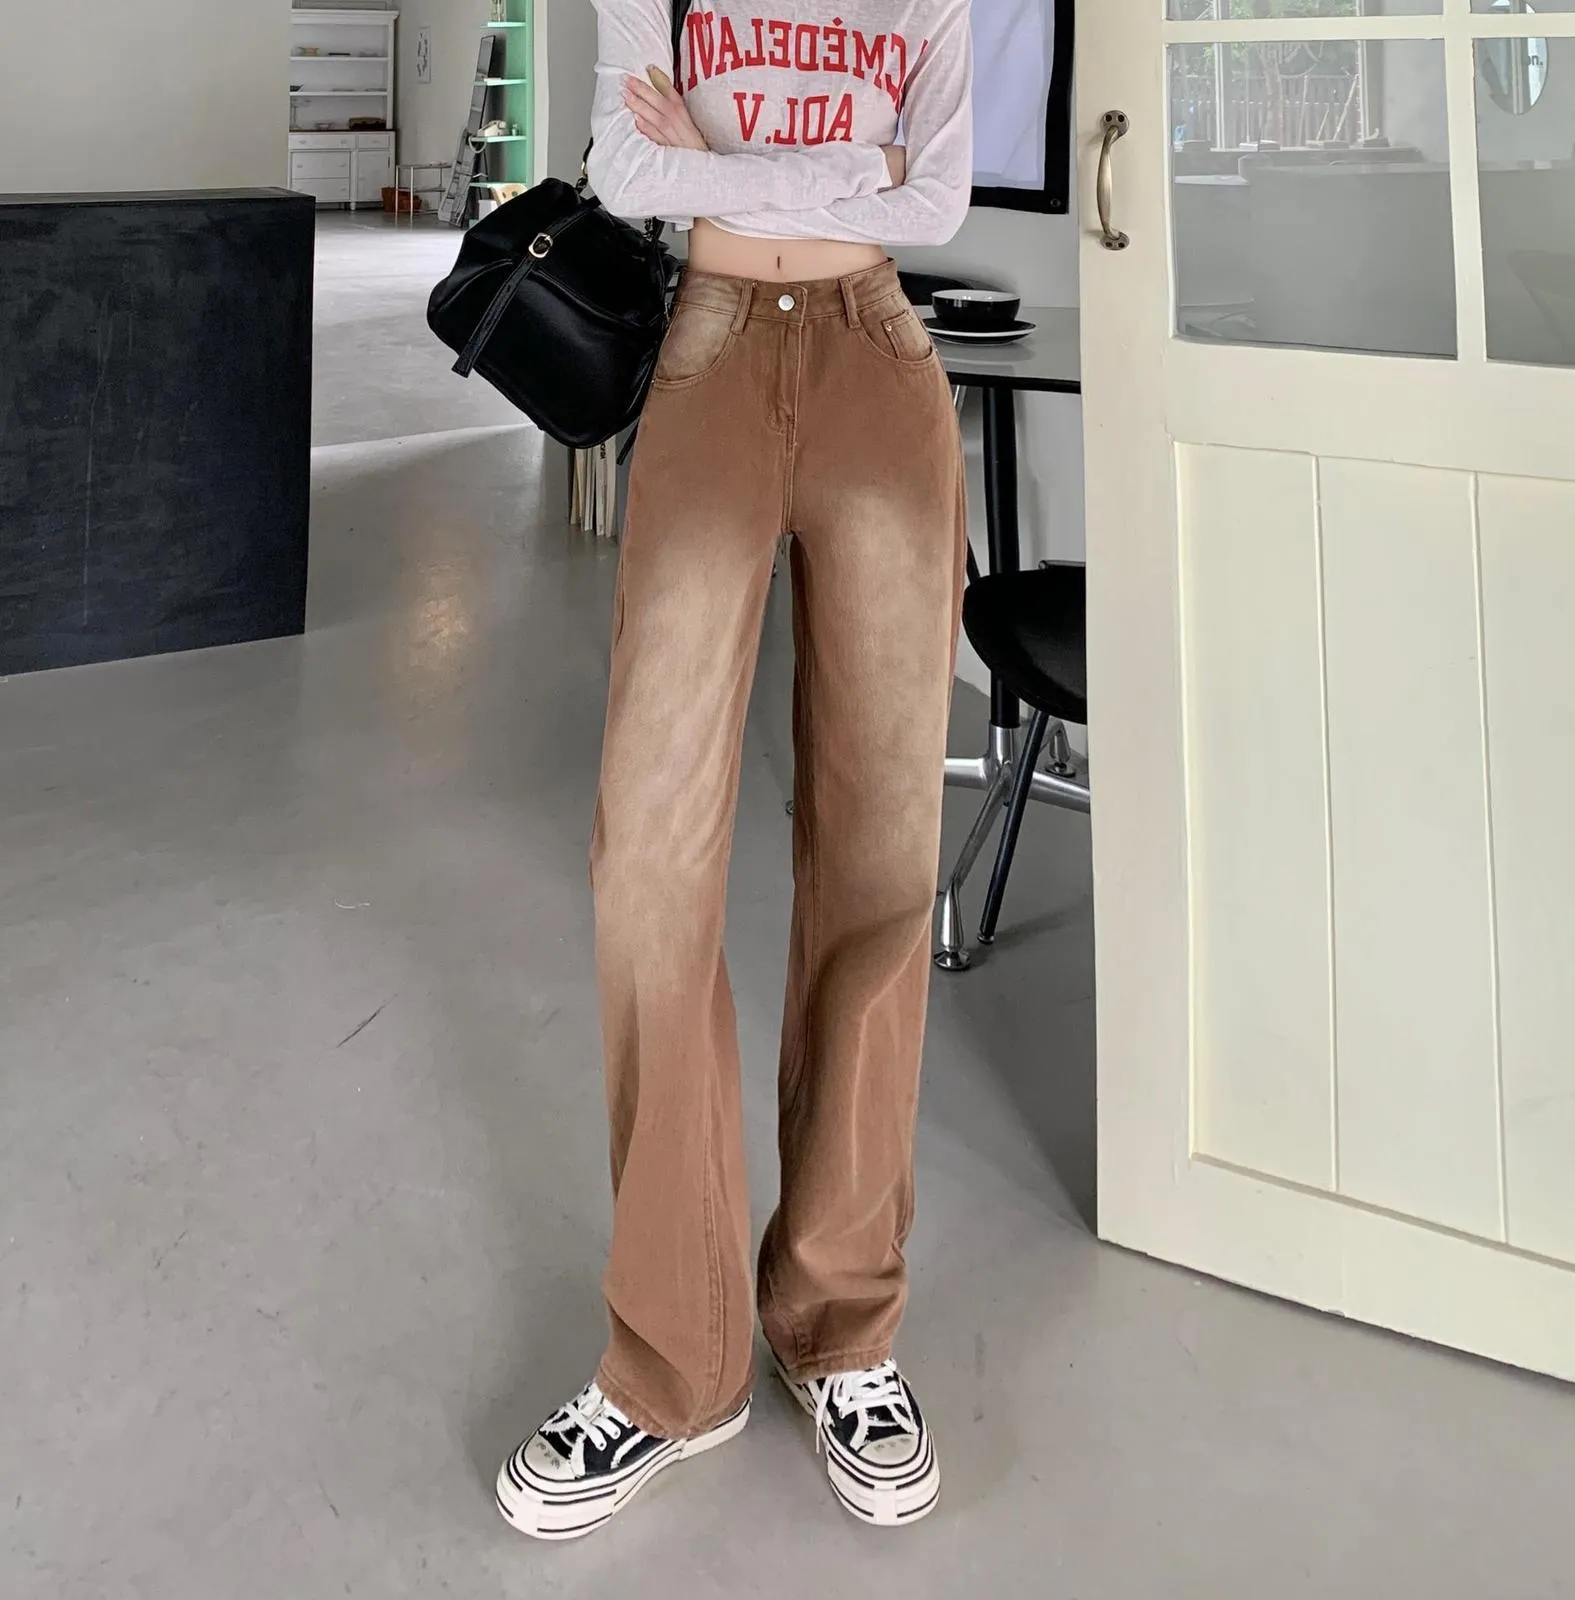 Women's Jeans CGC retro brown street clothing bag jeans women's high waisted cargo pants Korean fashion straight wide leg jeans women's Trousers 230408